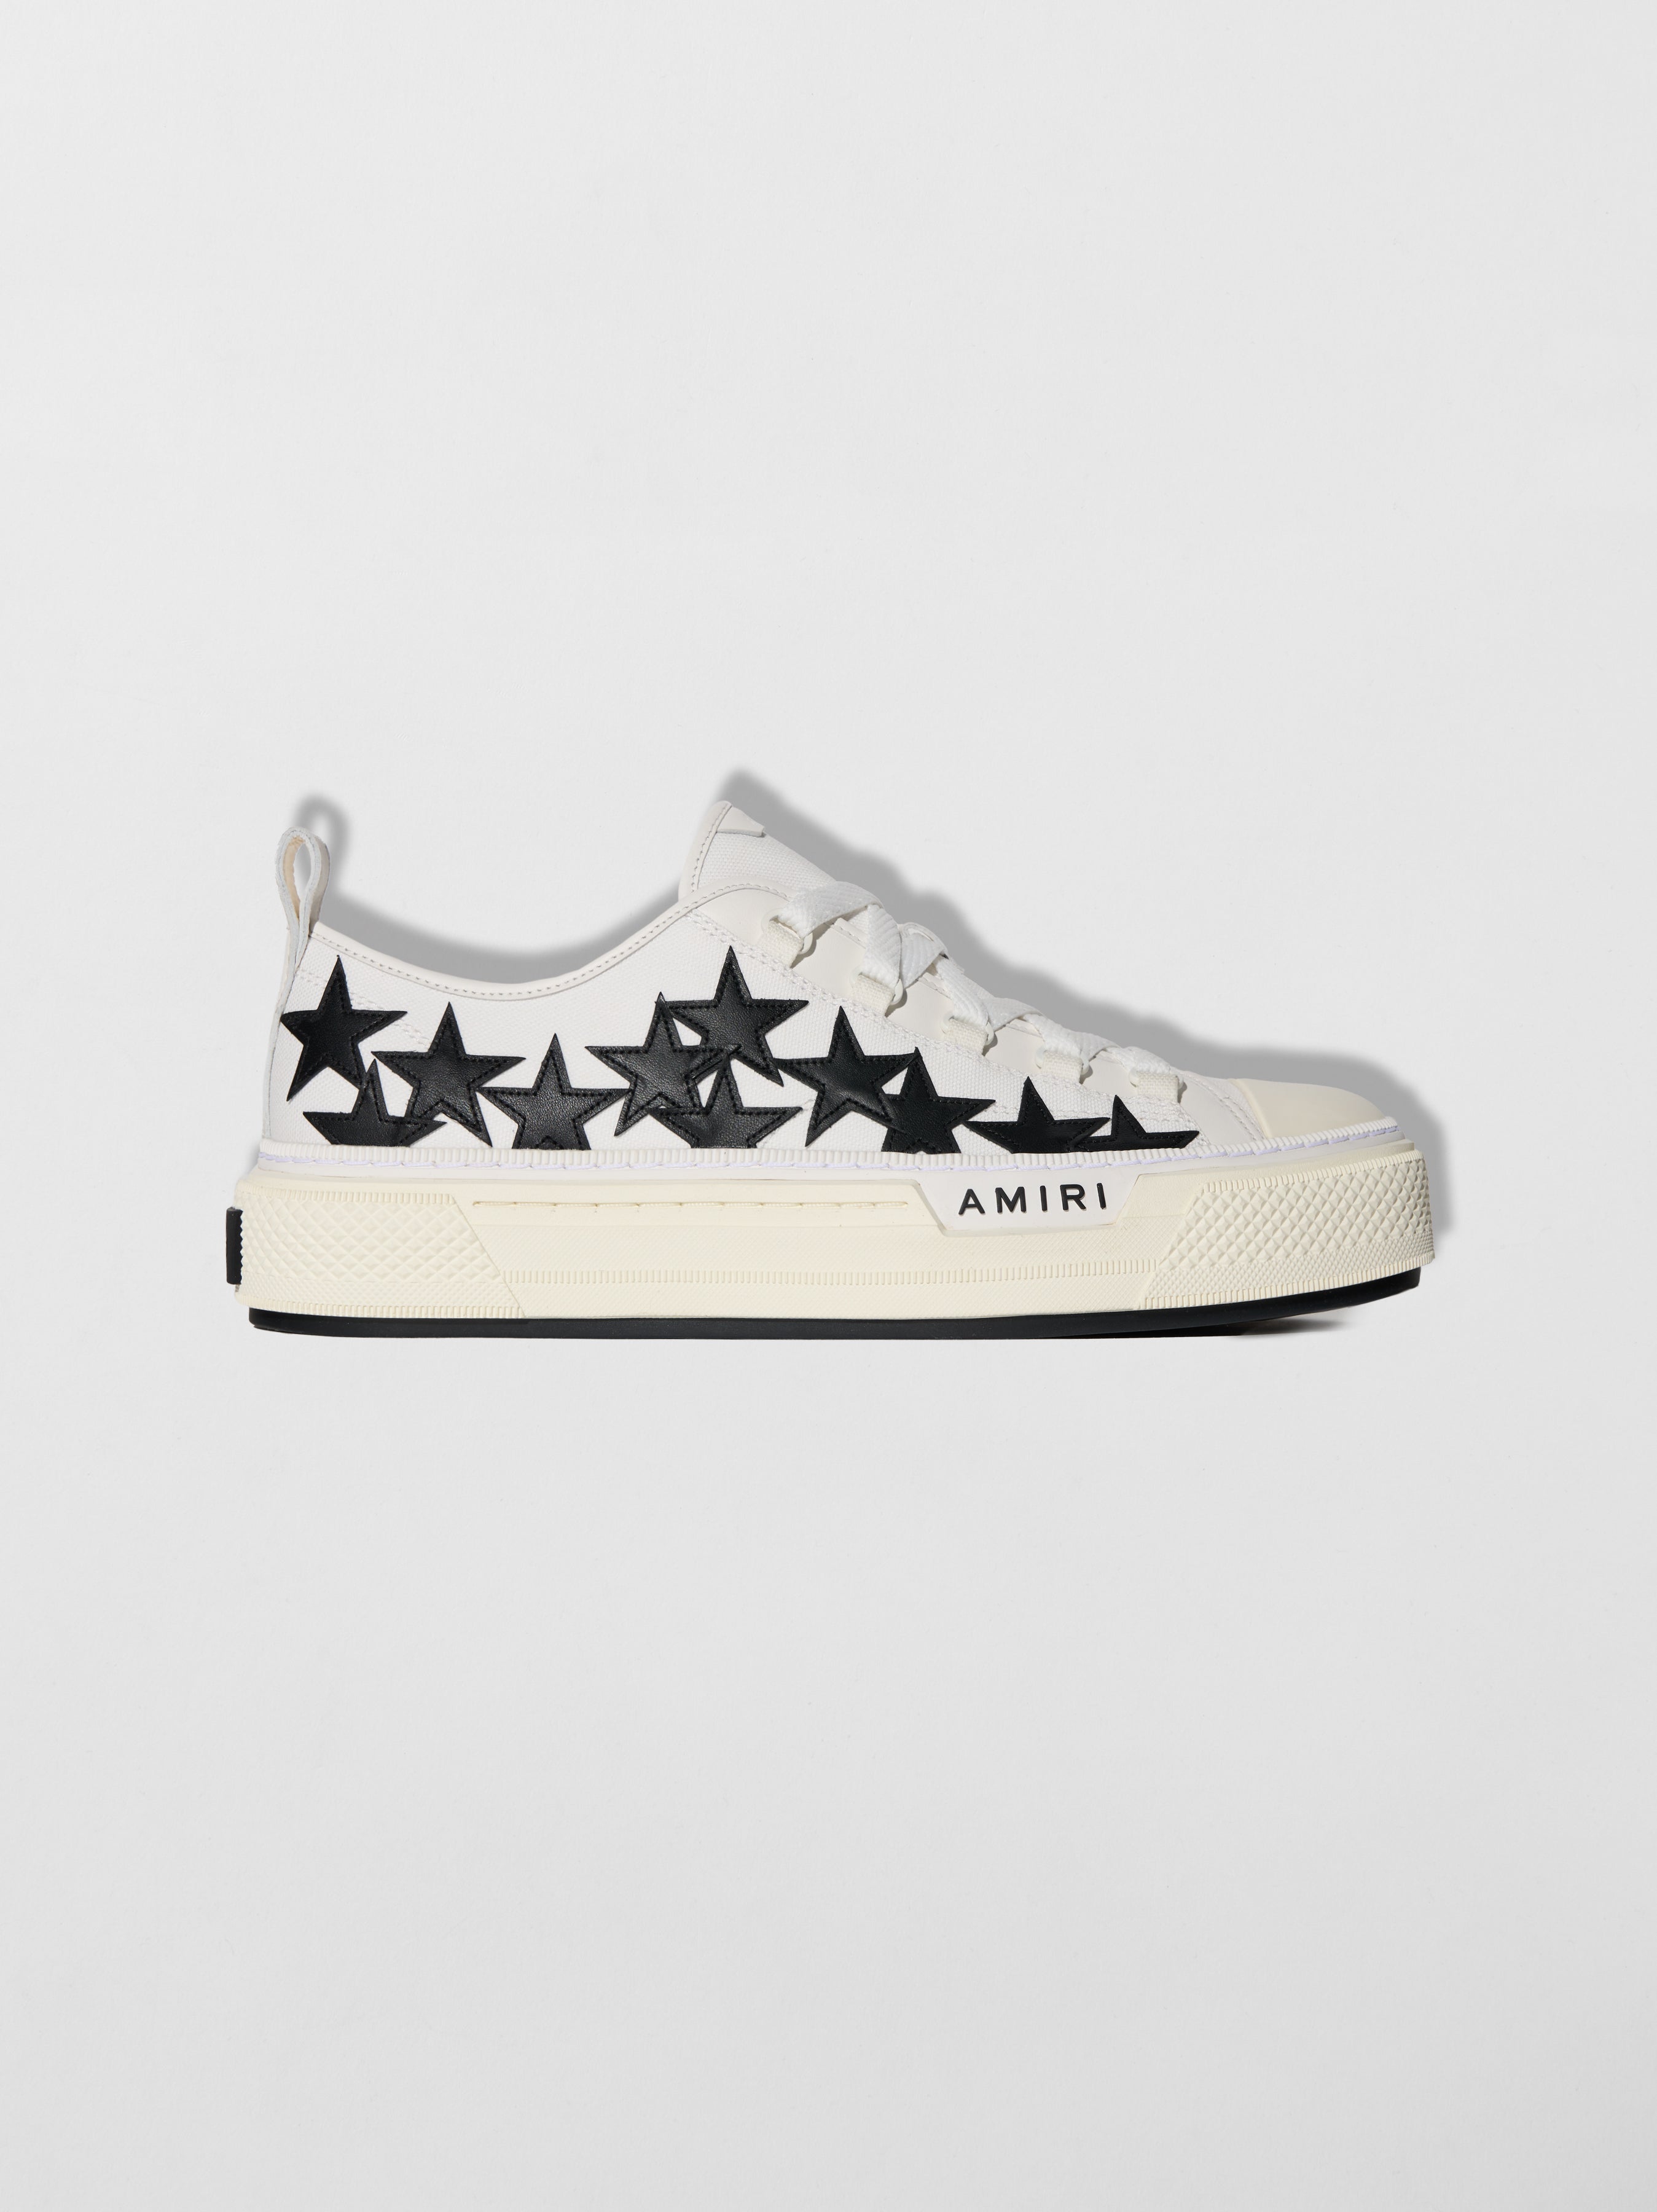 Product WOMEN- STARS COURT LOW - WHITE/BLACK featured image